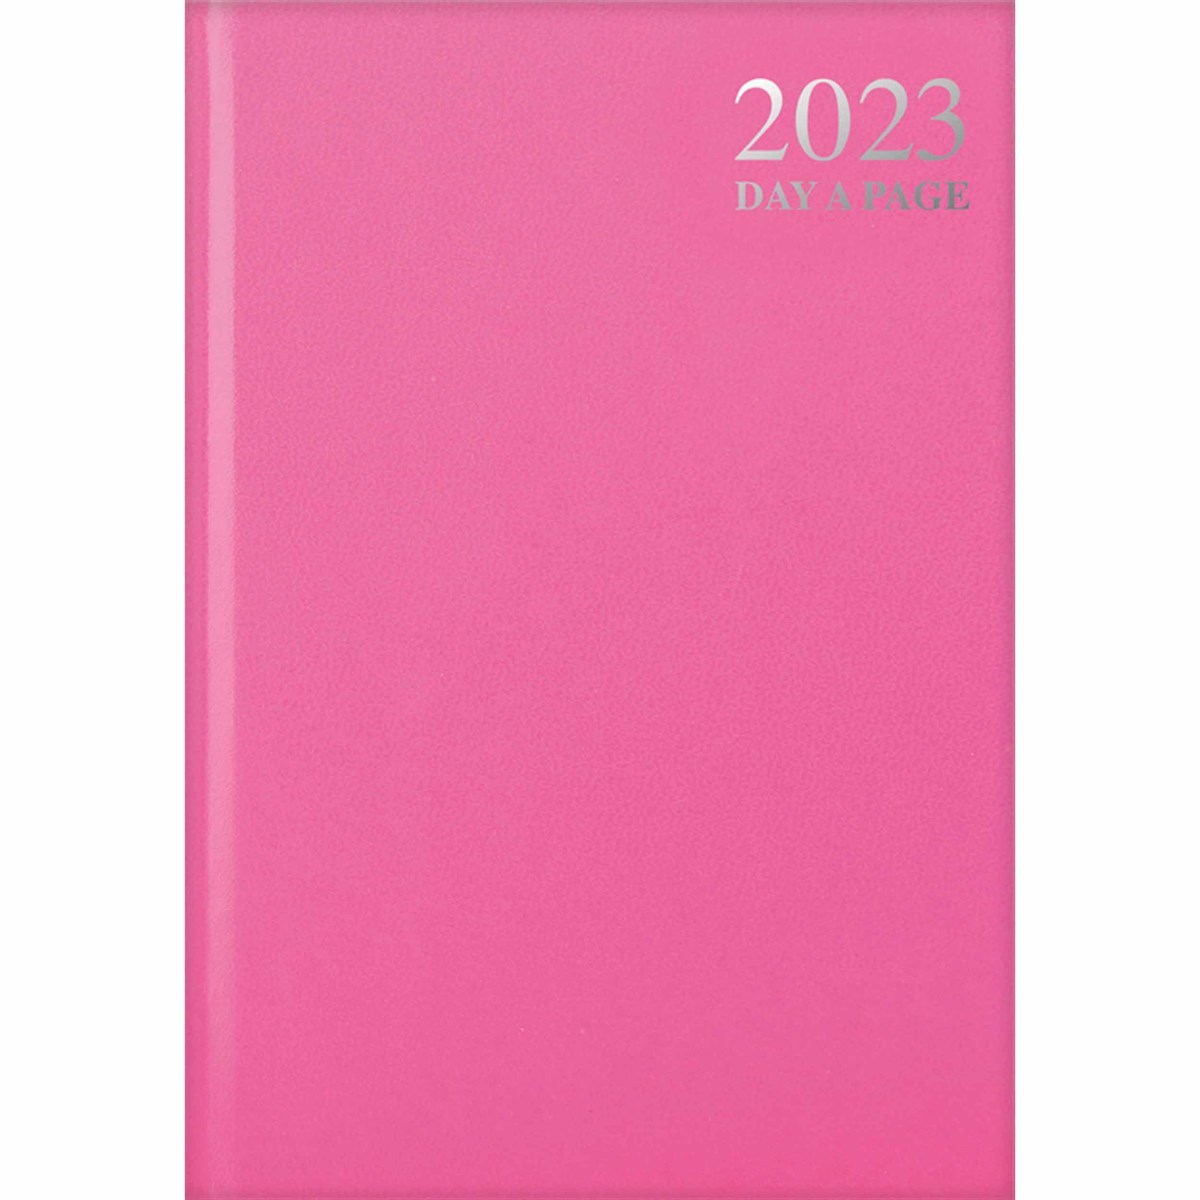 Pastel Pink Hardback Day-A-Page A6 Diary...